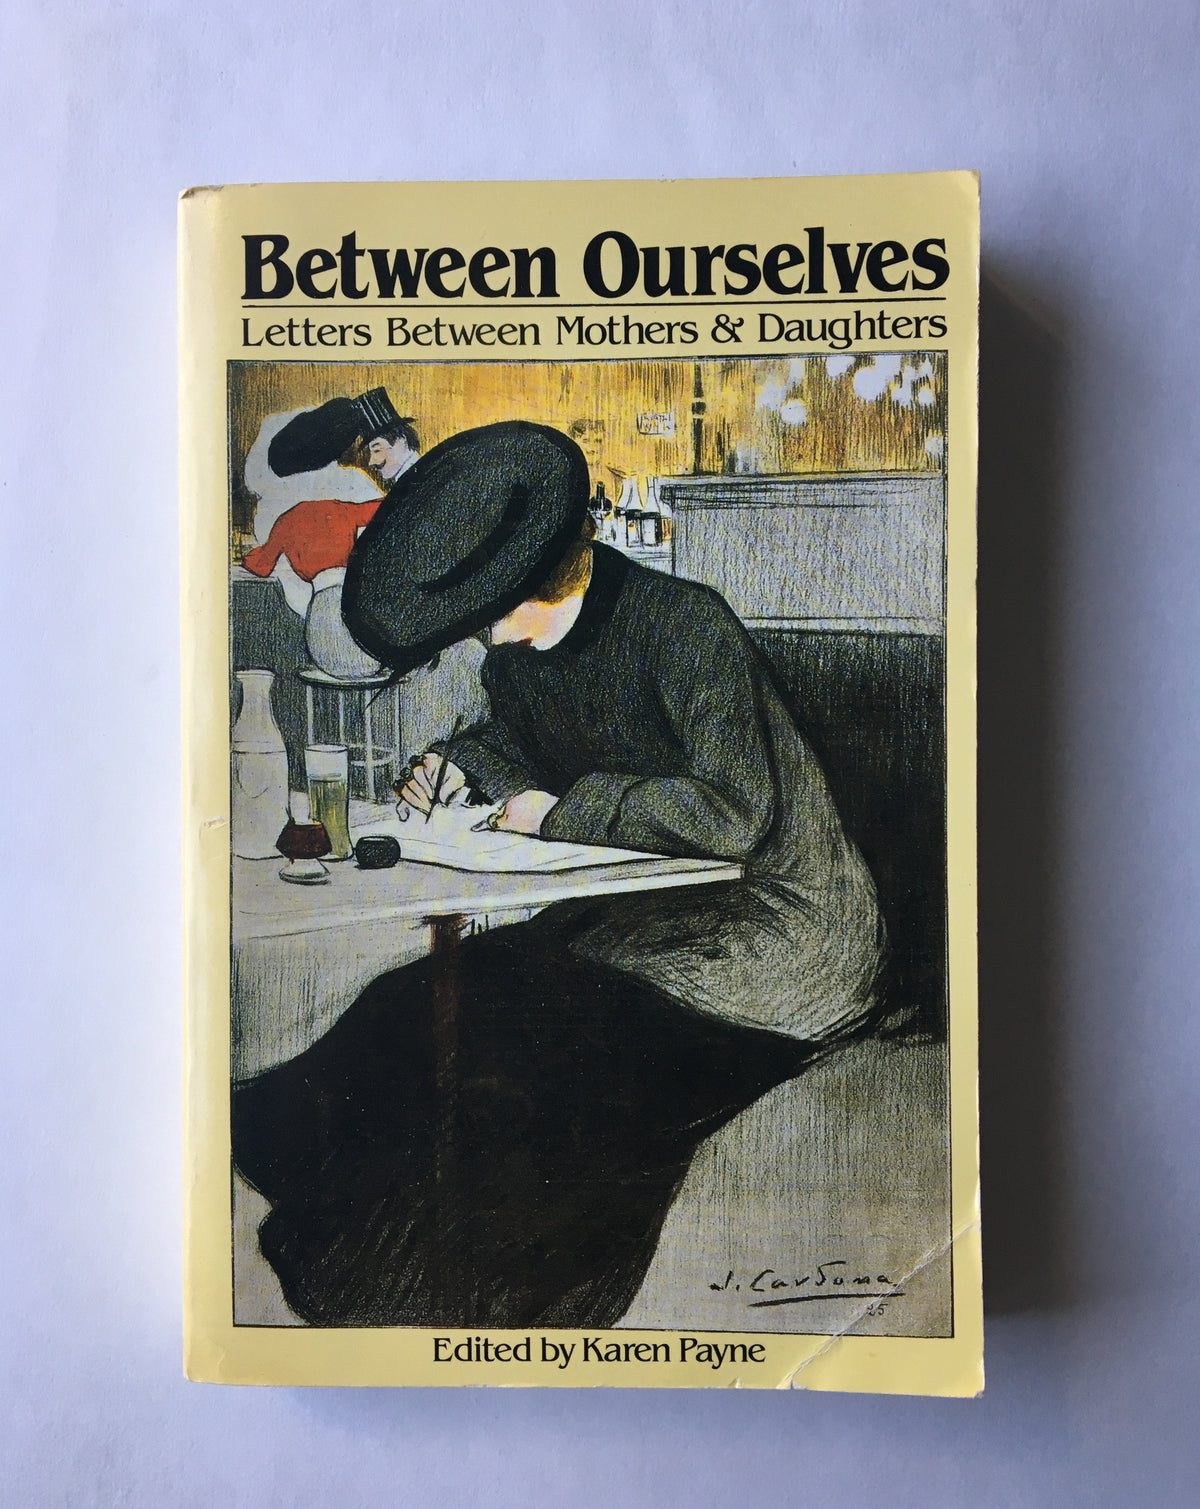 Between Ourselves: Letters Between Mothers &amp; Daughters edited by Karen Payne